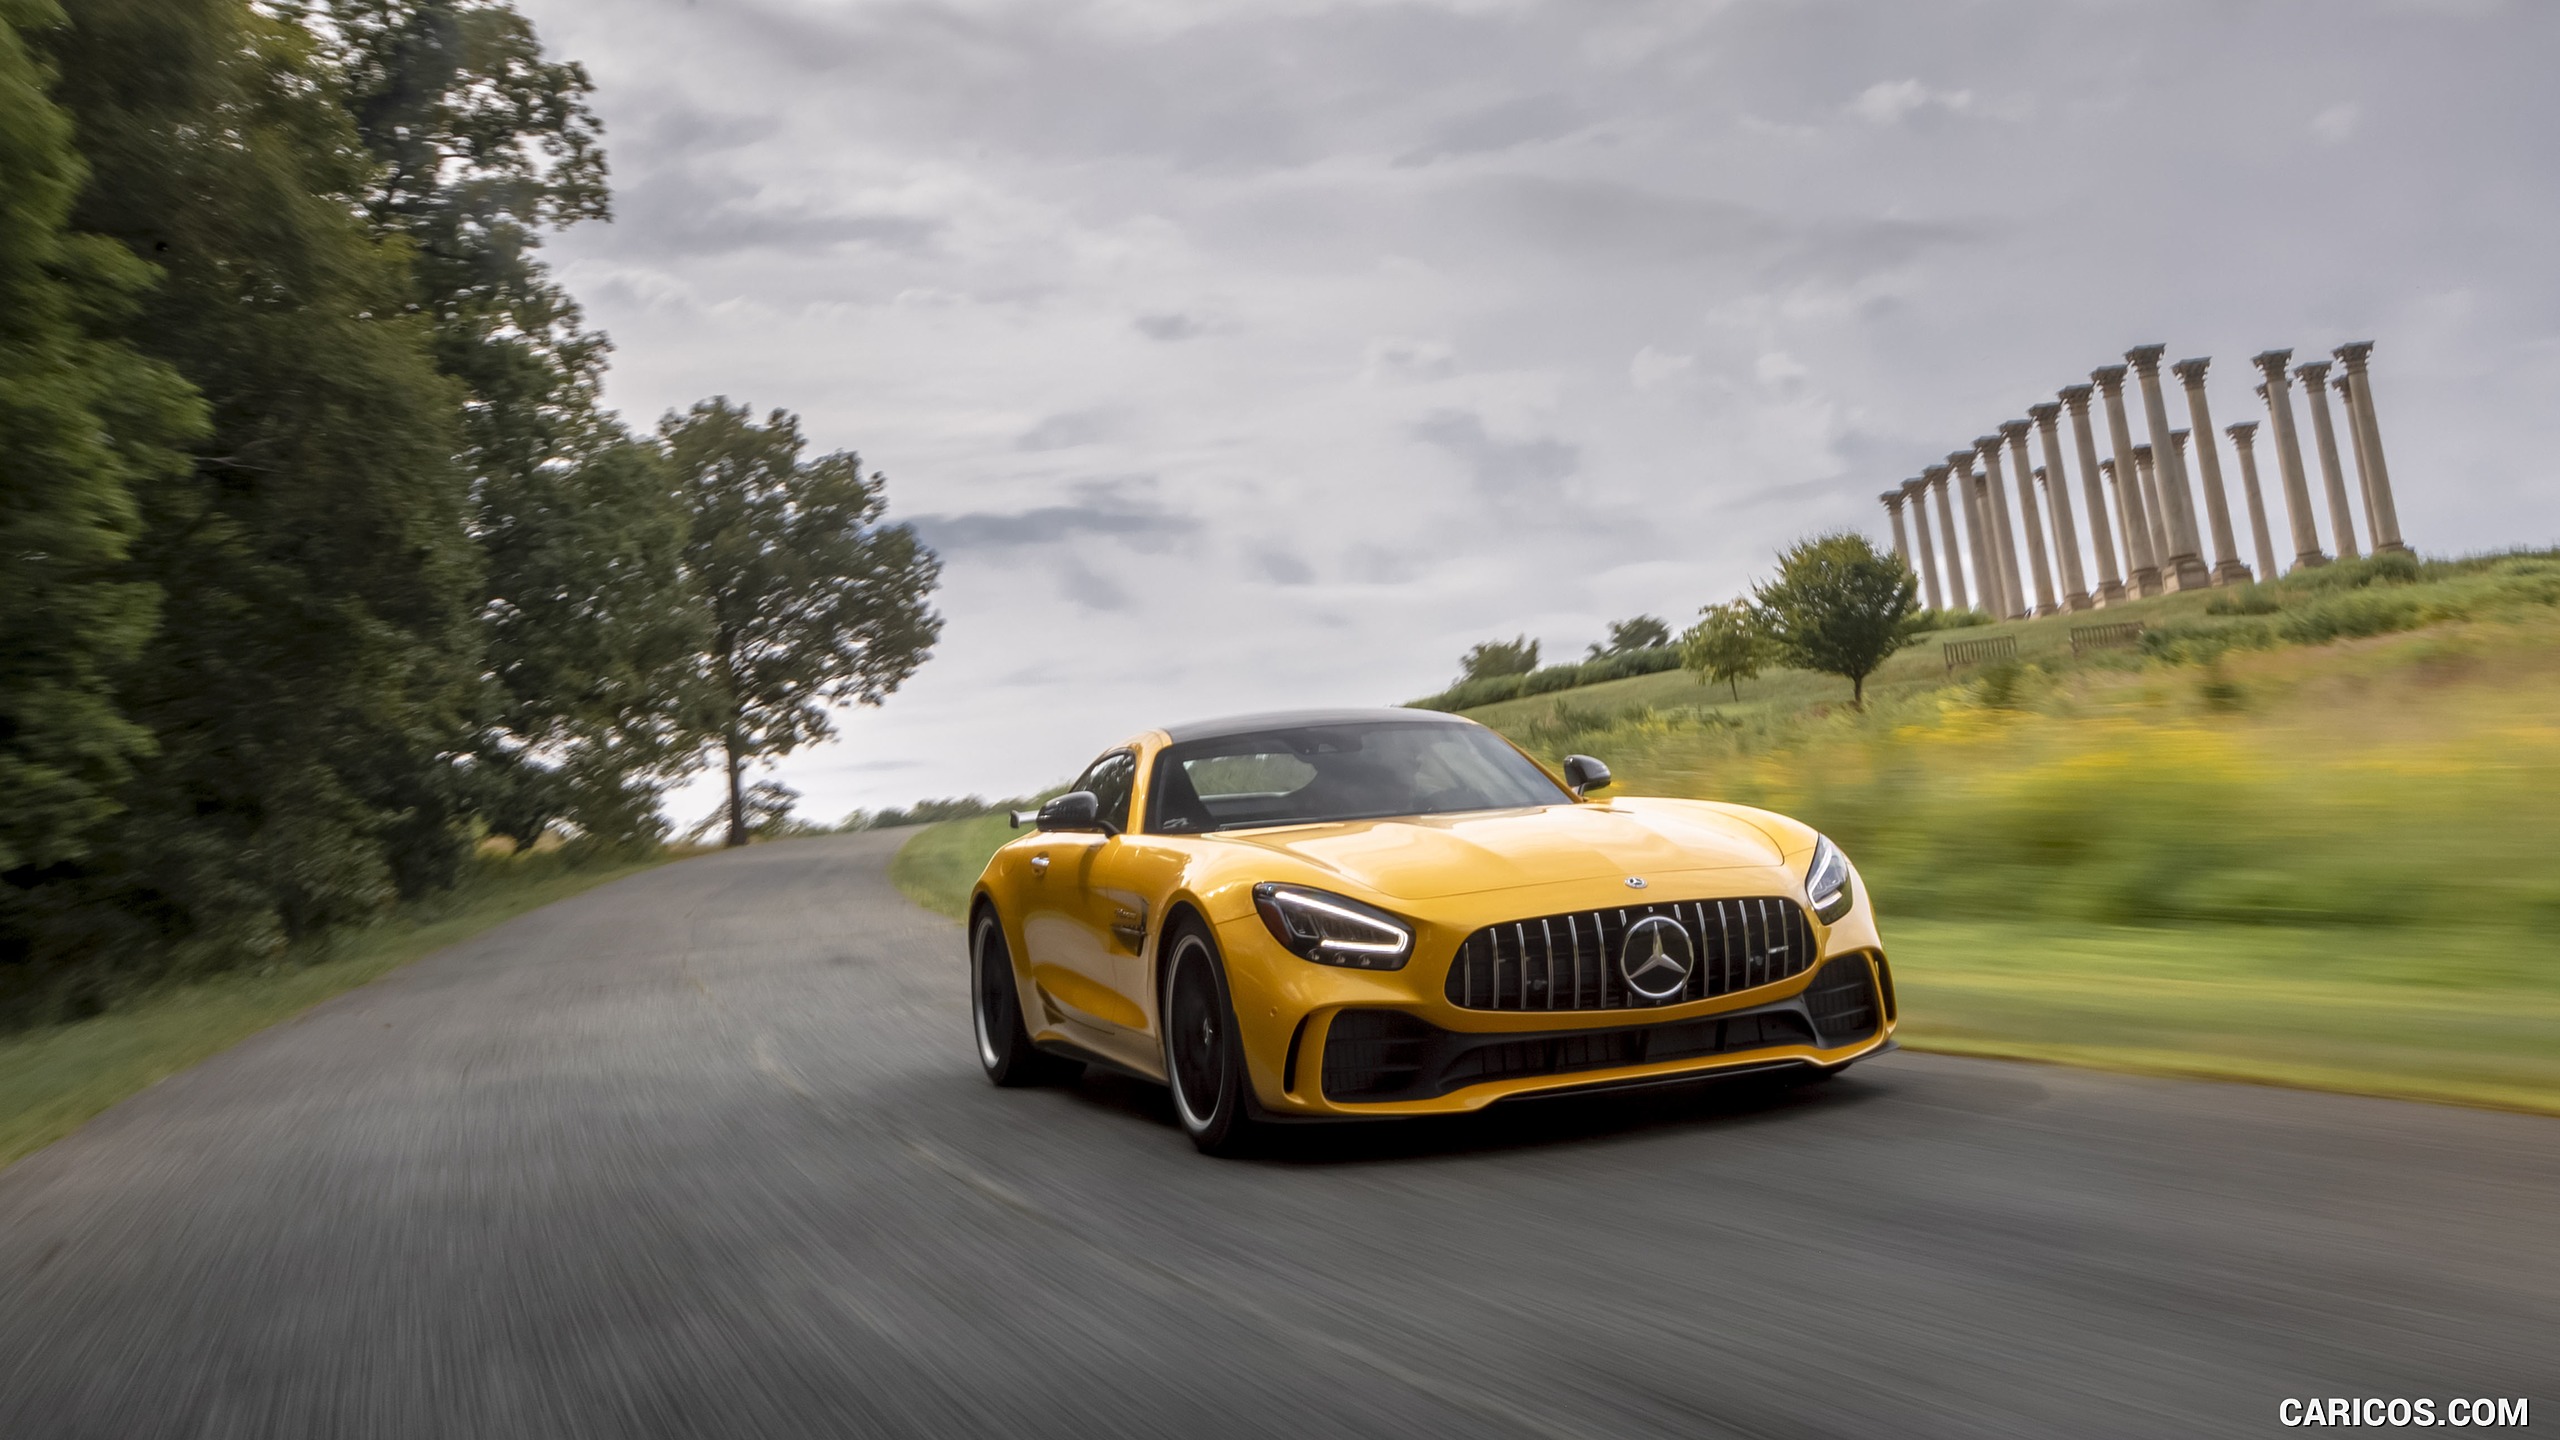 2020 Mercedes-AMG GT R Coupe (US-Spec) - Front Three-Quarter, #266 of 328